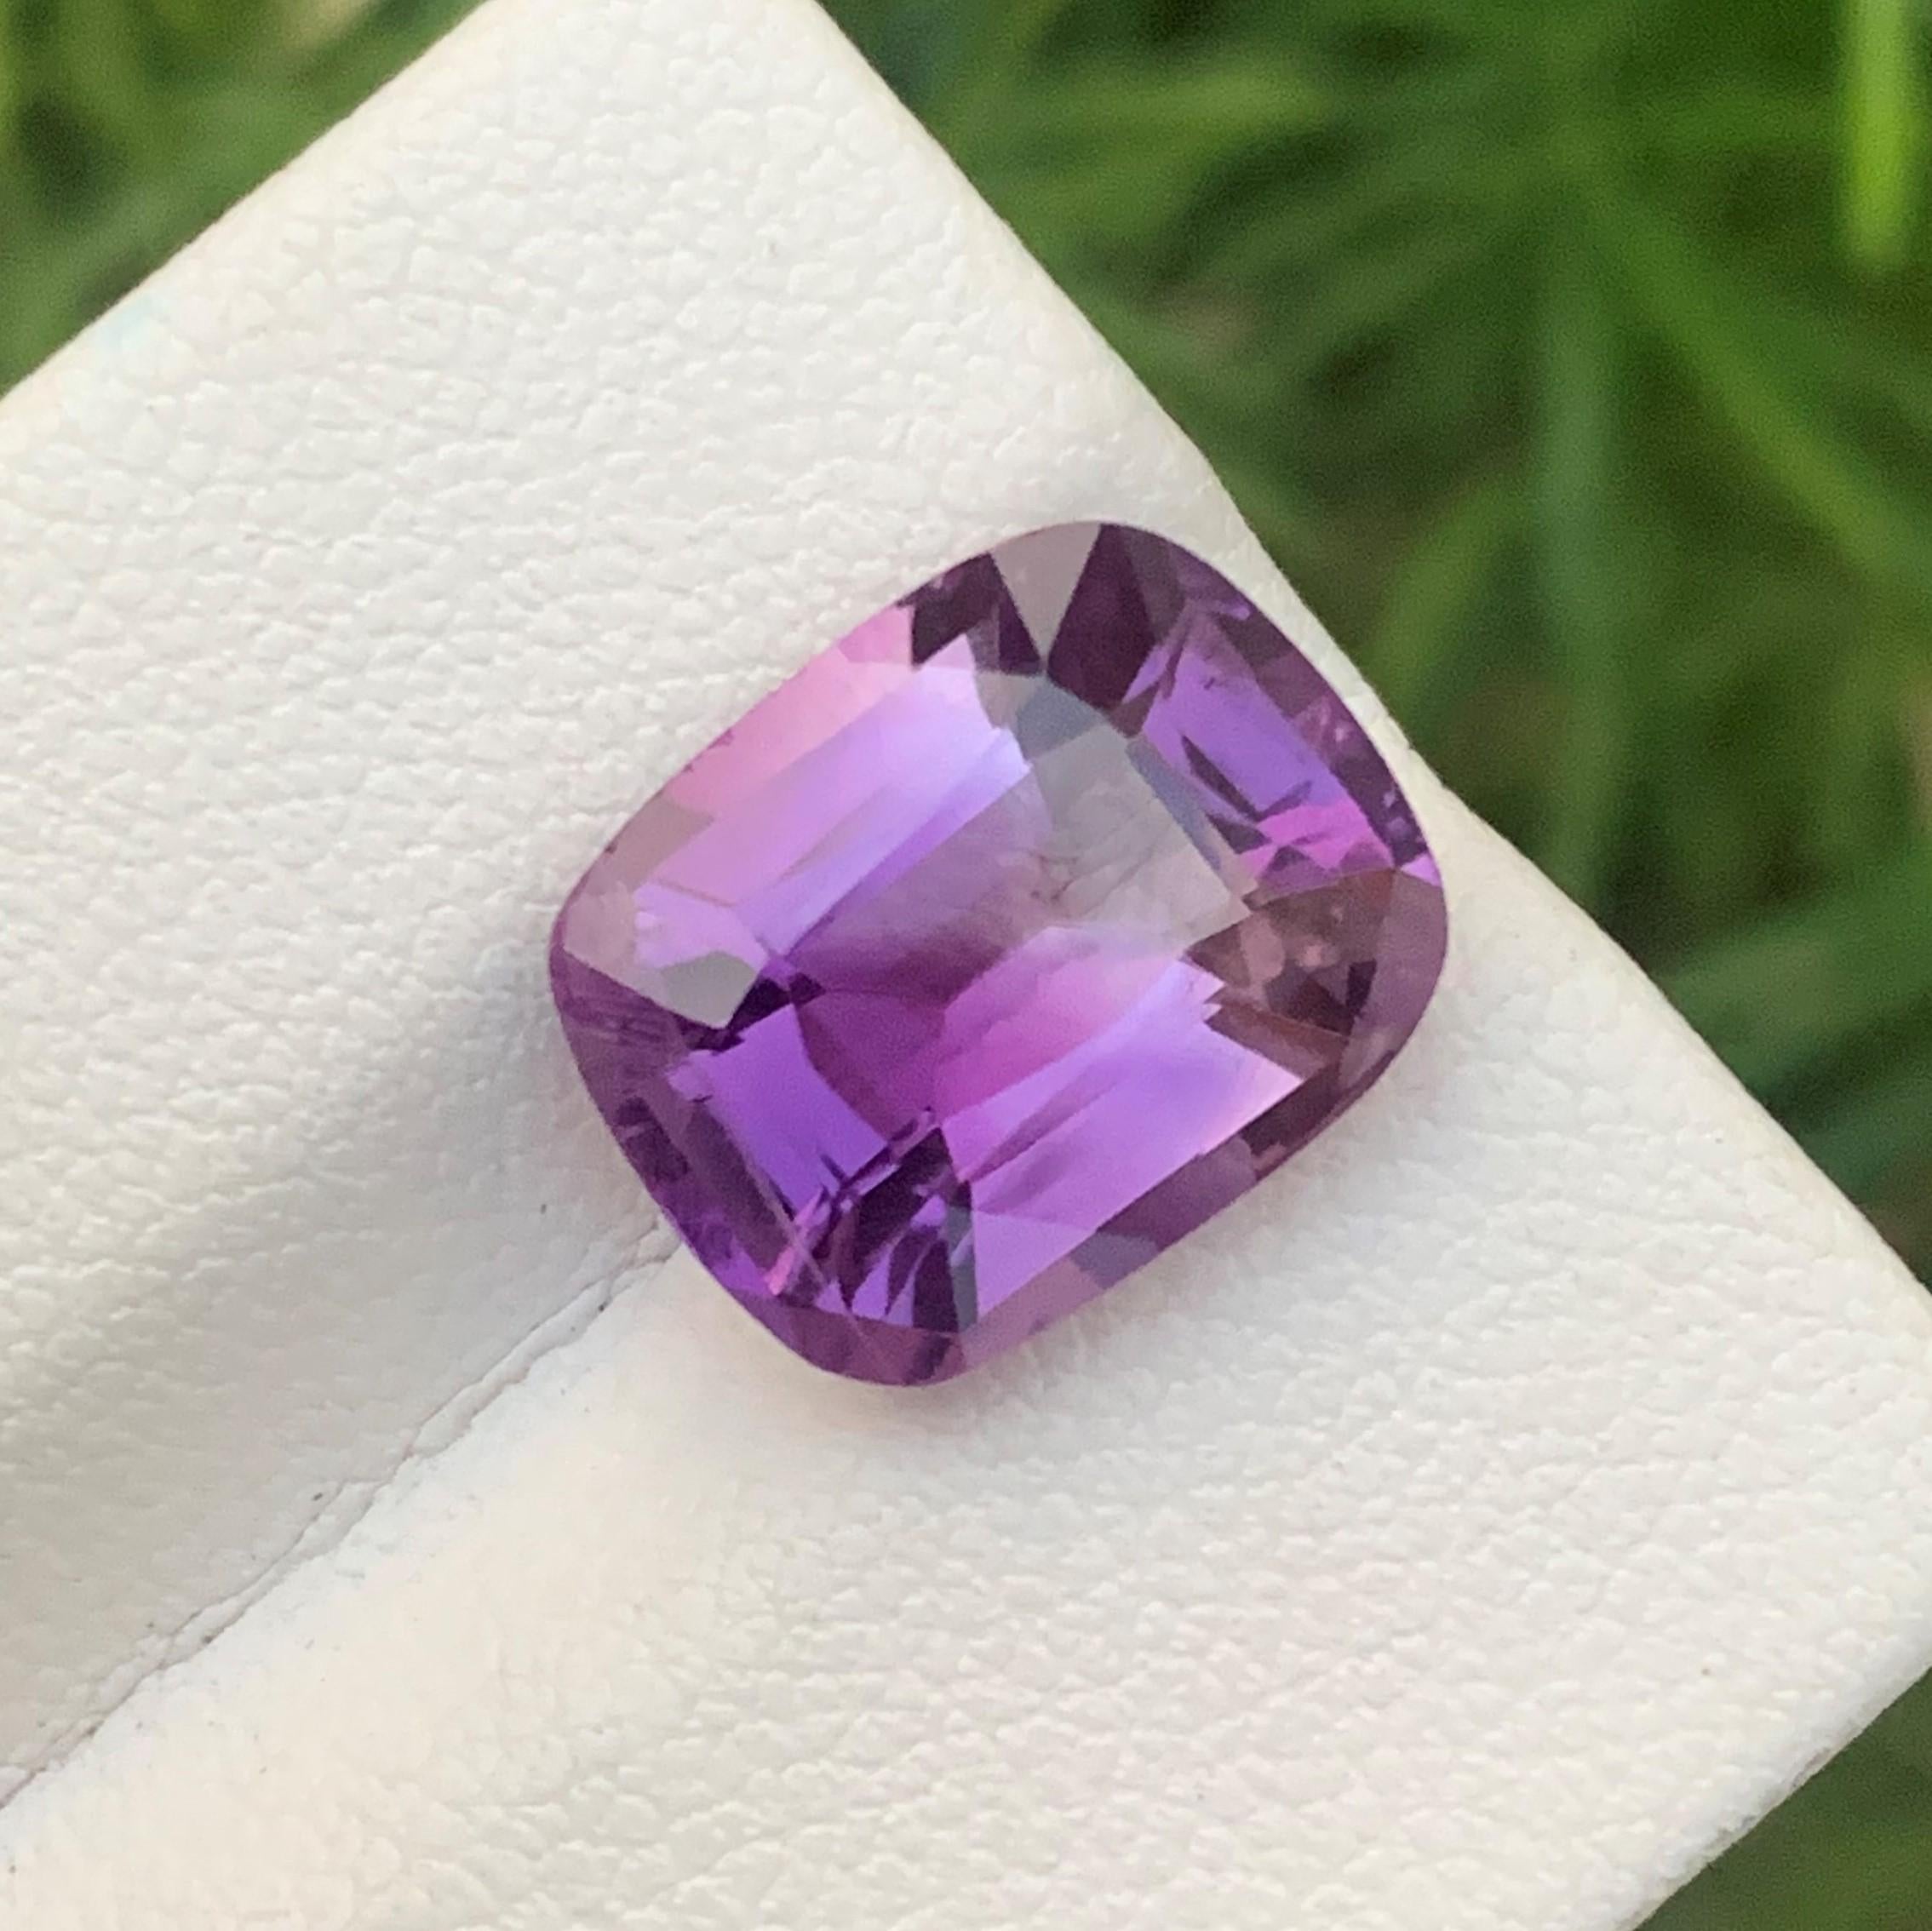 Gemstone Type : Amethyst
Weight : 5.50 Carats
Dimensions: 12.6x10.1x7 mm
Clarity : Clean
Origin : Brazil
Color: Purple
Shape: Cushion
Facet: Fancy Cut
Certificate: On Demand
Month: February
.
Purported amethyst powers for healing
enhancing the